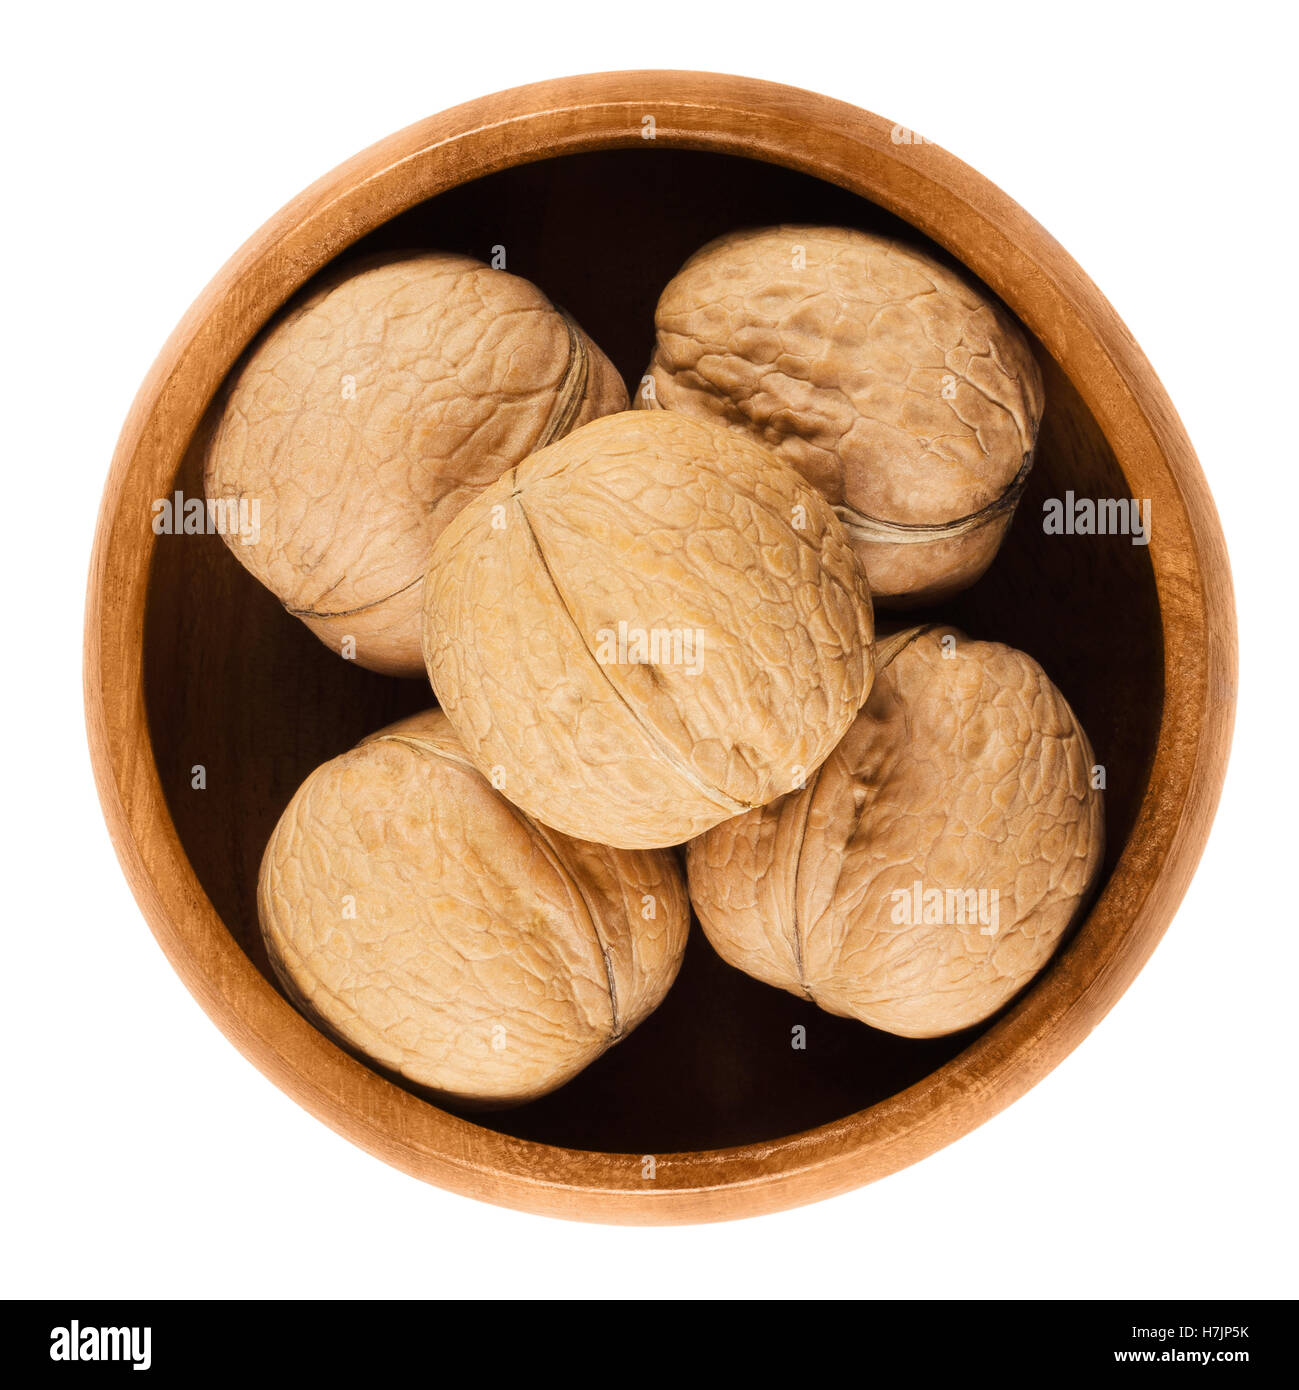 Whole walnuts with shells in a wooden bowl on white background. Brown dried nuts of common walnuts, Juglans regia. Stock Photo